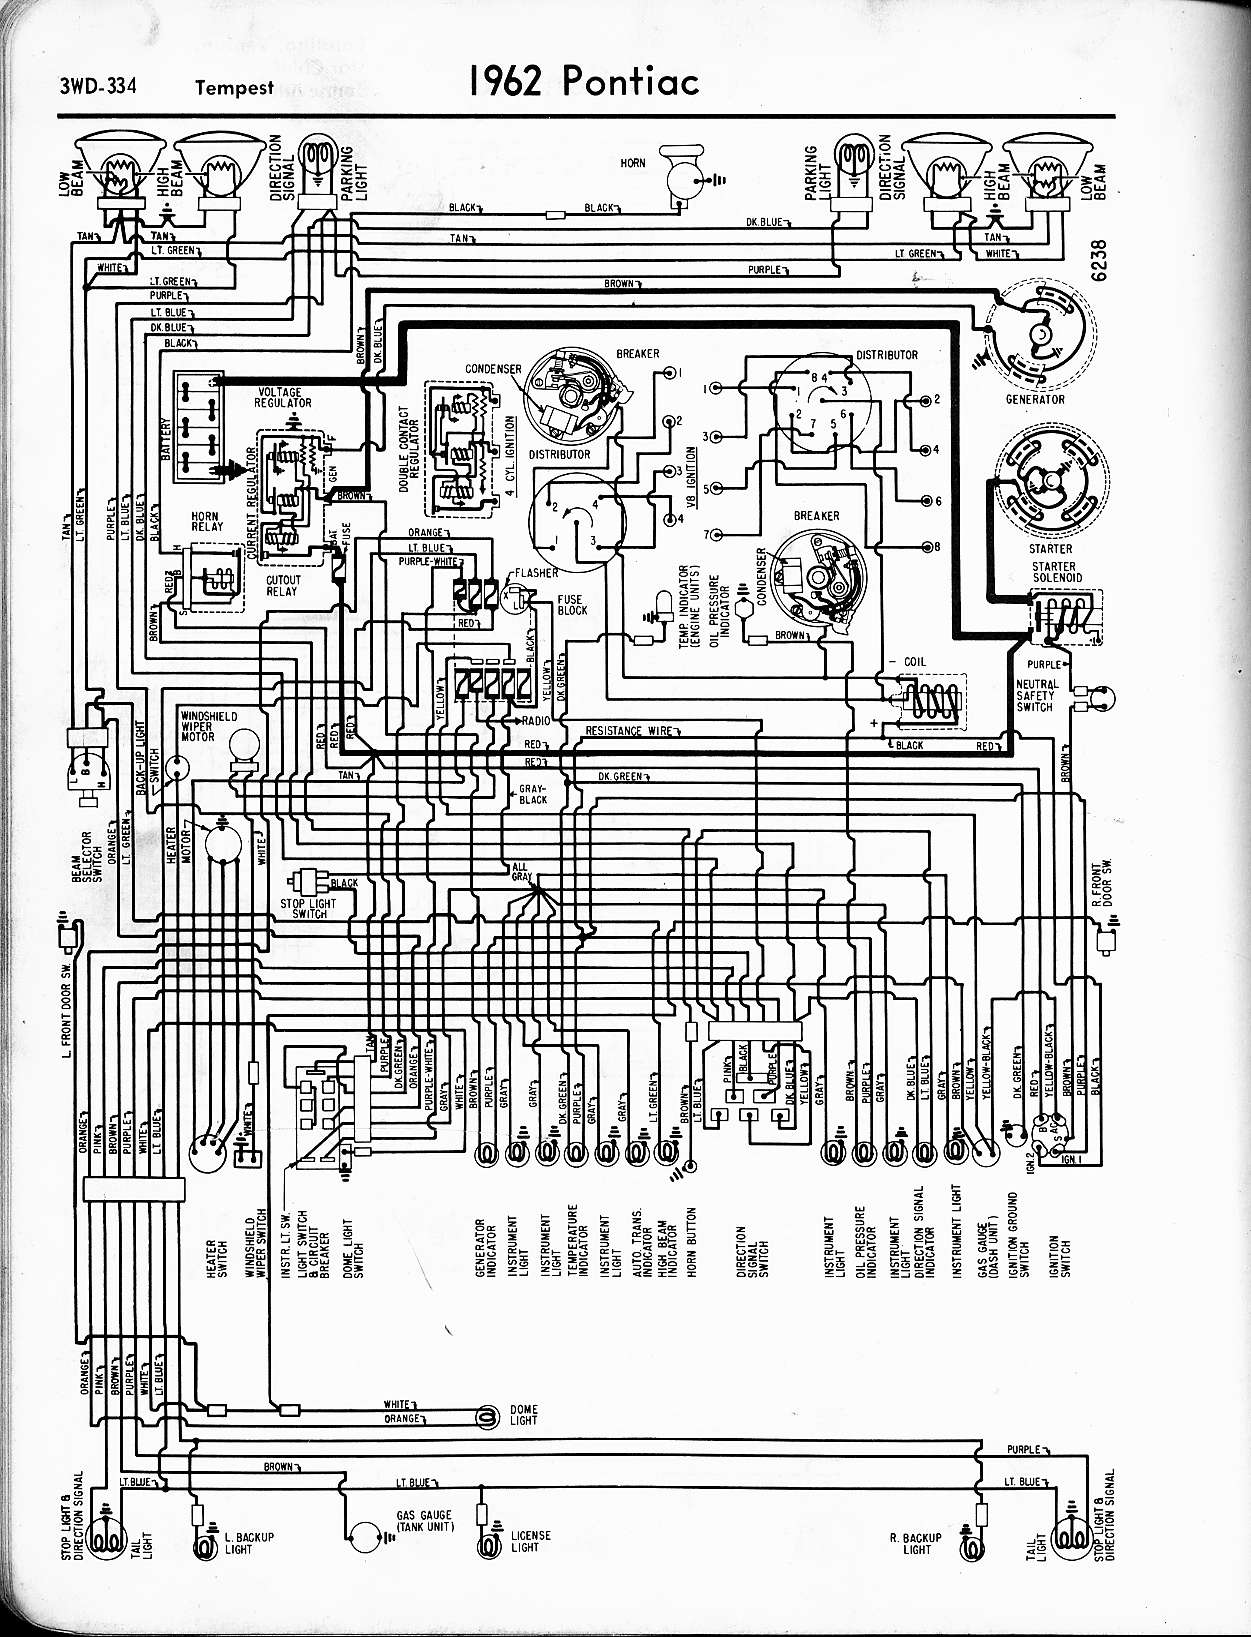 Pontiac wiring 1957-1965 Motor Starter Wiring Diagram The Old Car Manual Project